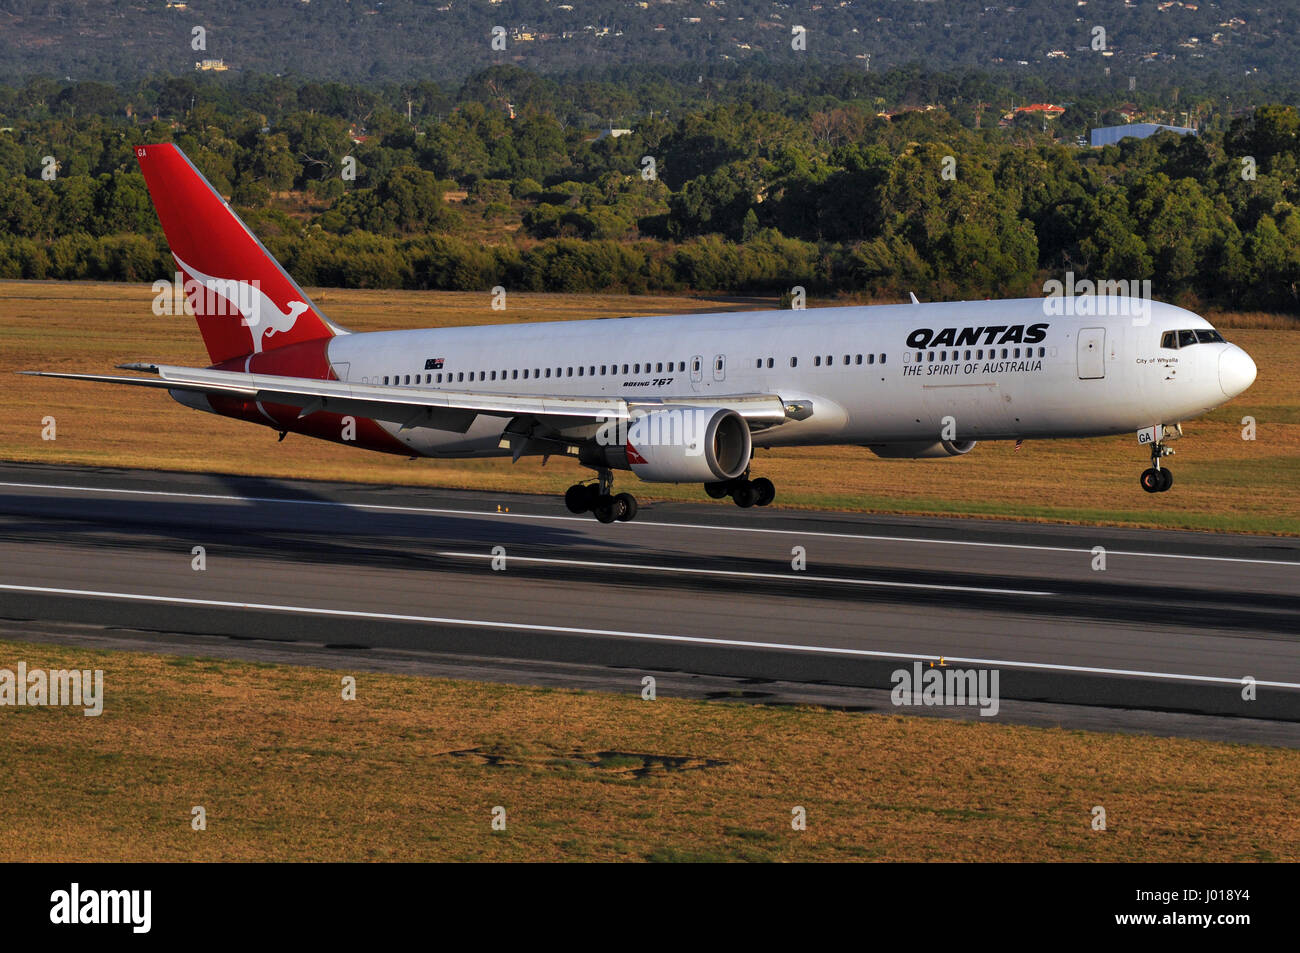 A Qantas Boeing 767 landing at Perth International Airport, in Western Australia. Taken from an R44 helicopter flying alongside. Stock Photo